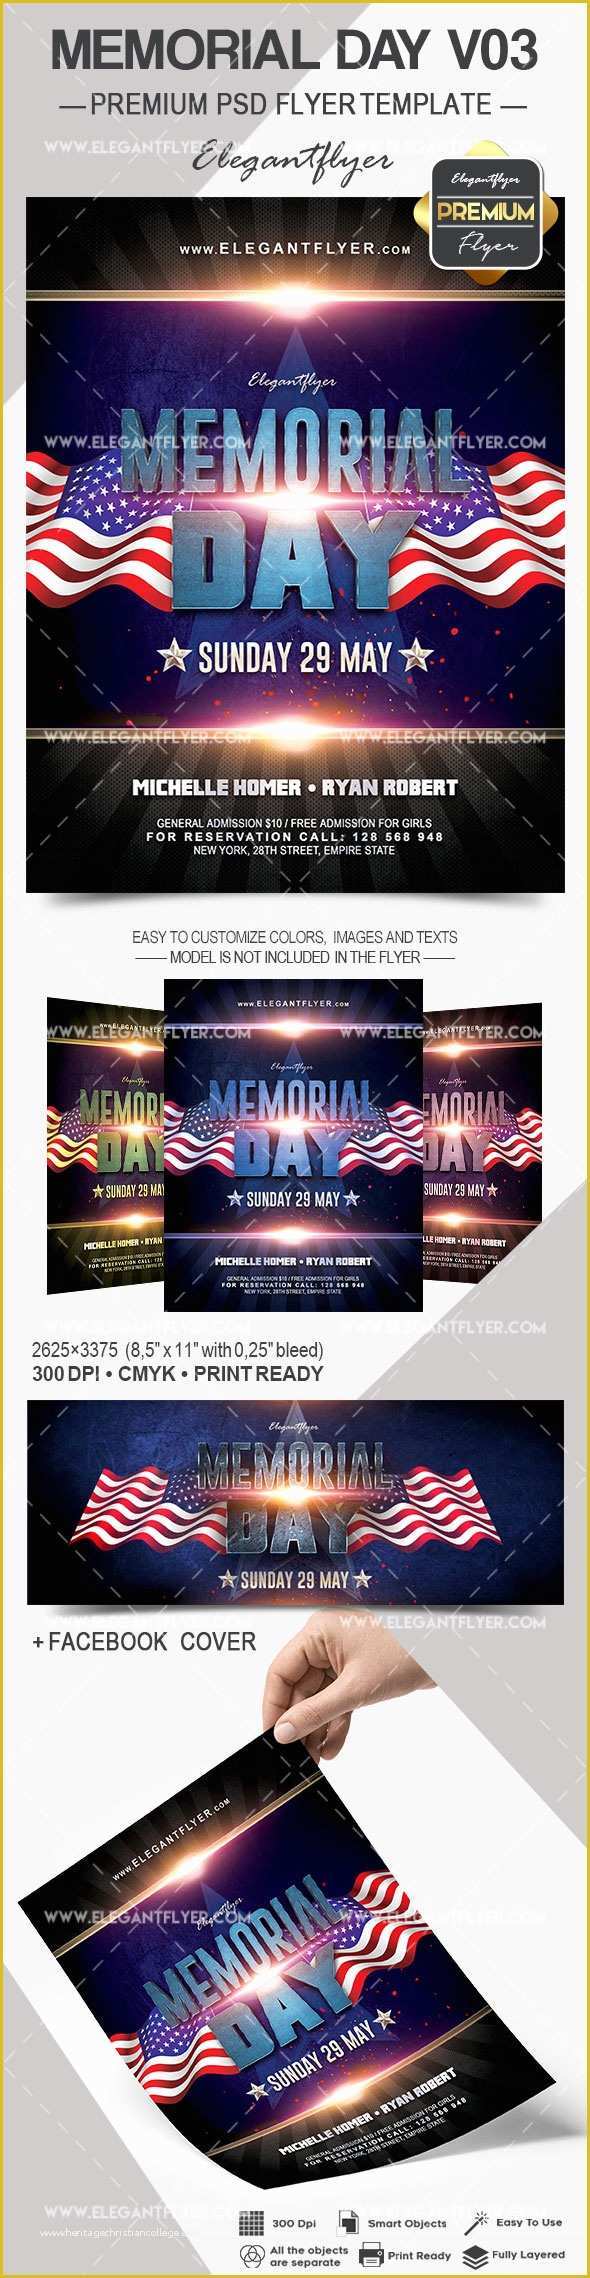 Free Funeral Flyer Template Psd Of Memorial Day V03 – Flyer Psd Template – by Elegantflyer